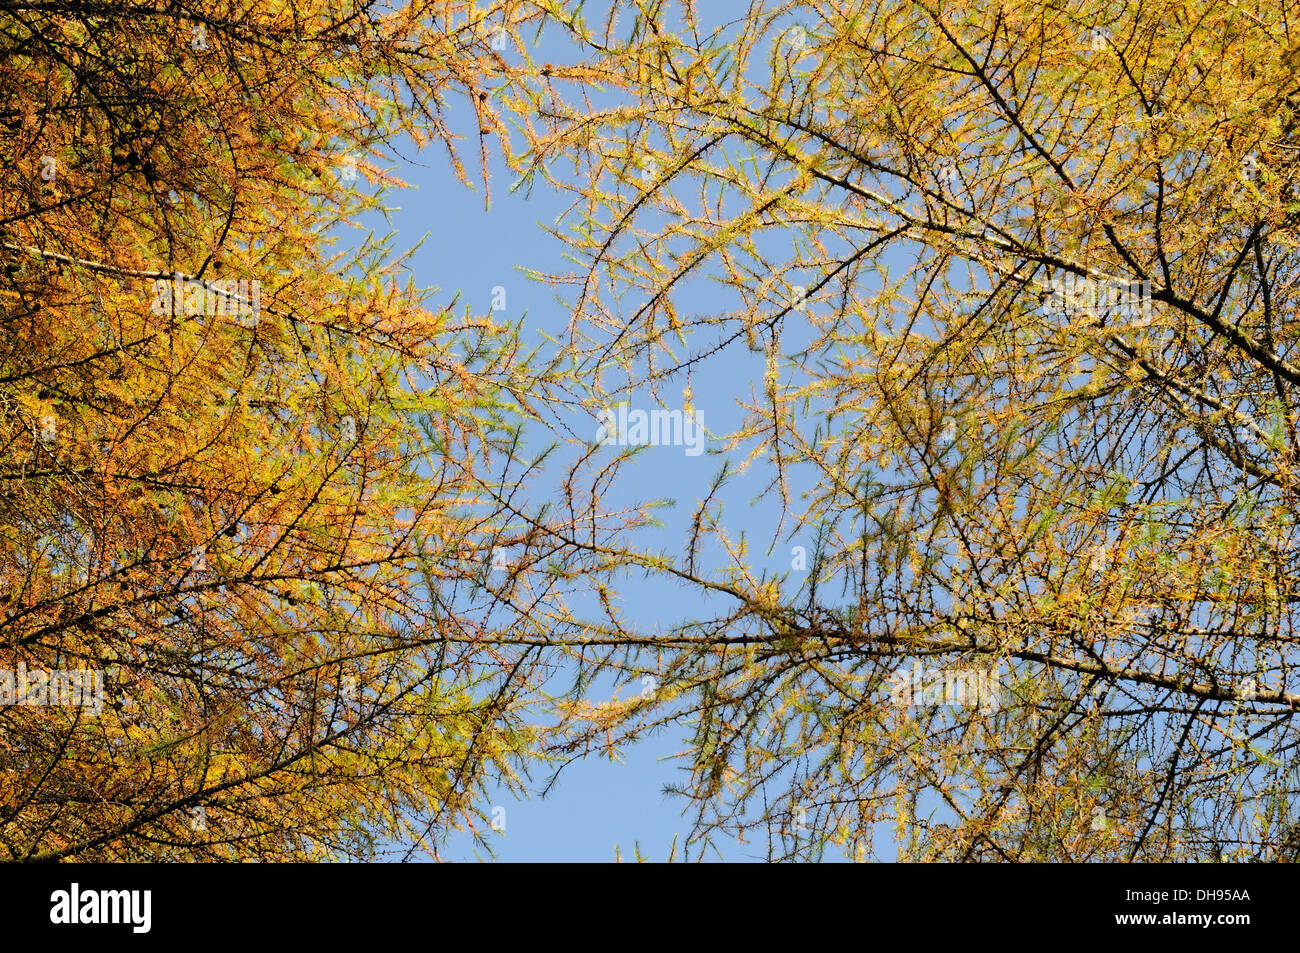 Branches and leaves of Larch tree in autumn  against a blue sky Stock Photo